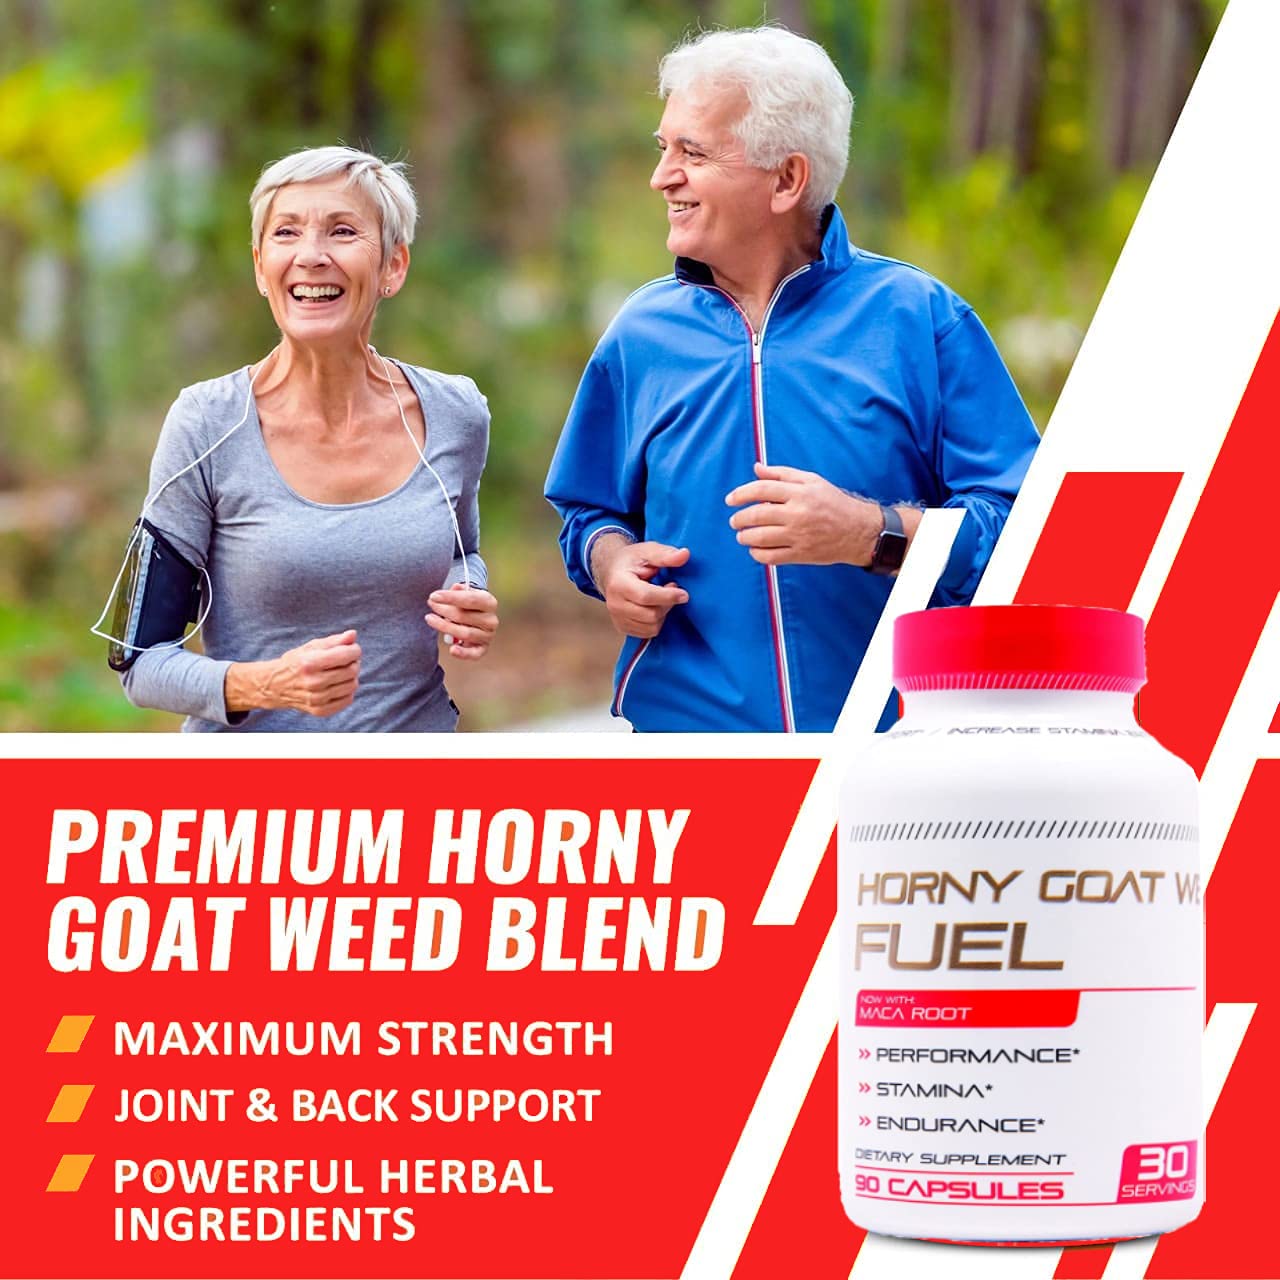 Nucell Horny Goat Weed for Men and Women - [2185mg Maximum Strength] - Maca Root, Ginseng, Saw Palmetto, Muira Puama, Tribulus, L-Arginine - USA Made - Joint & Back Support - 90 Count